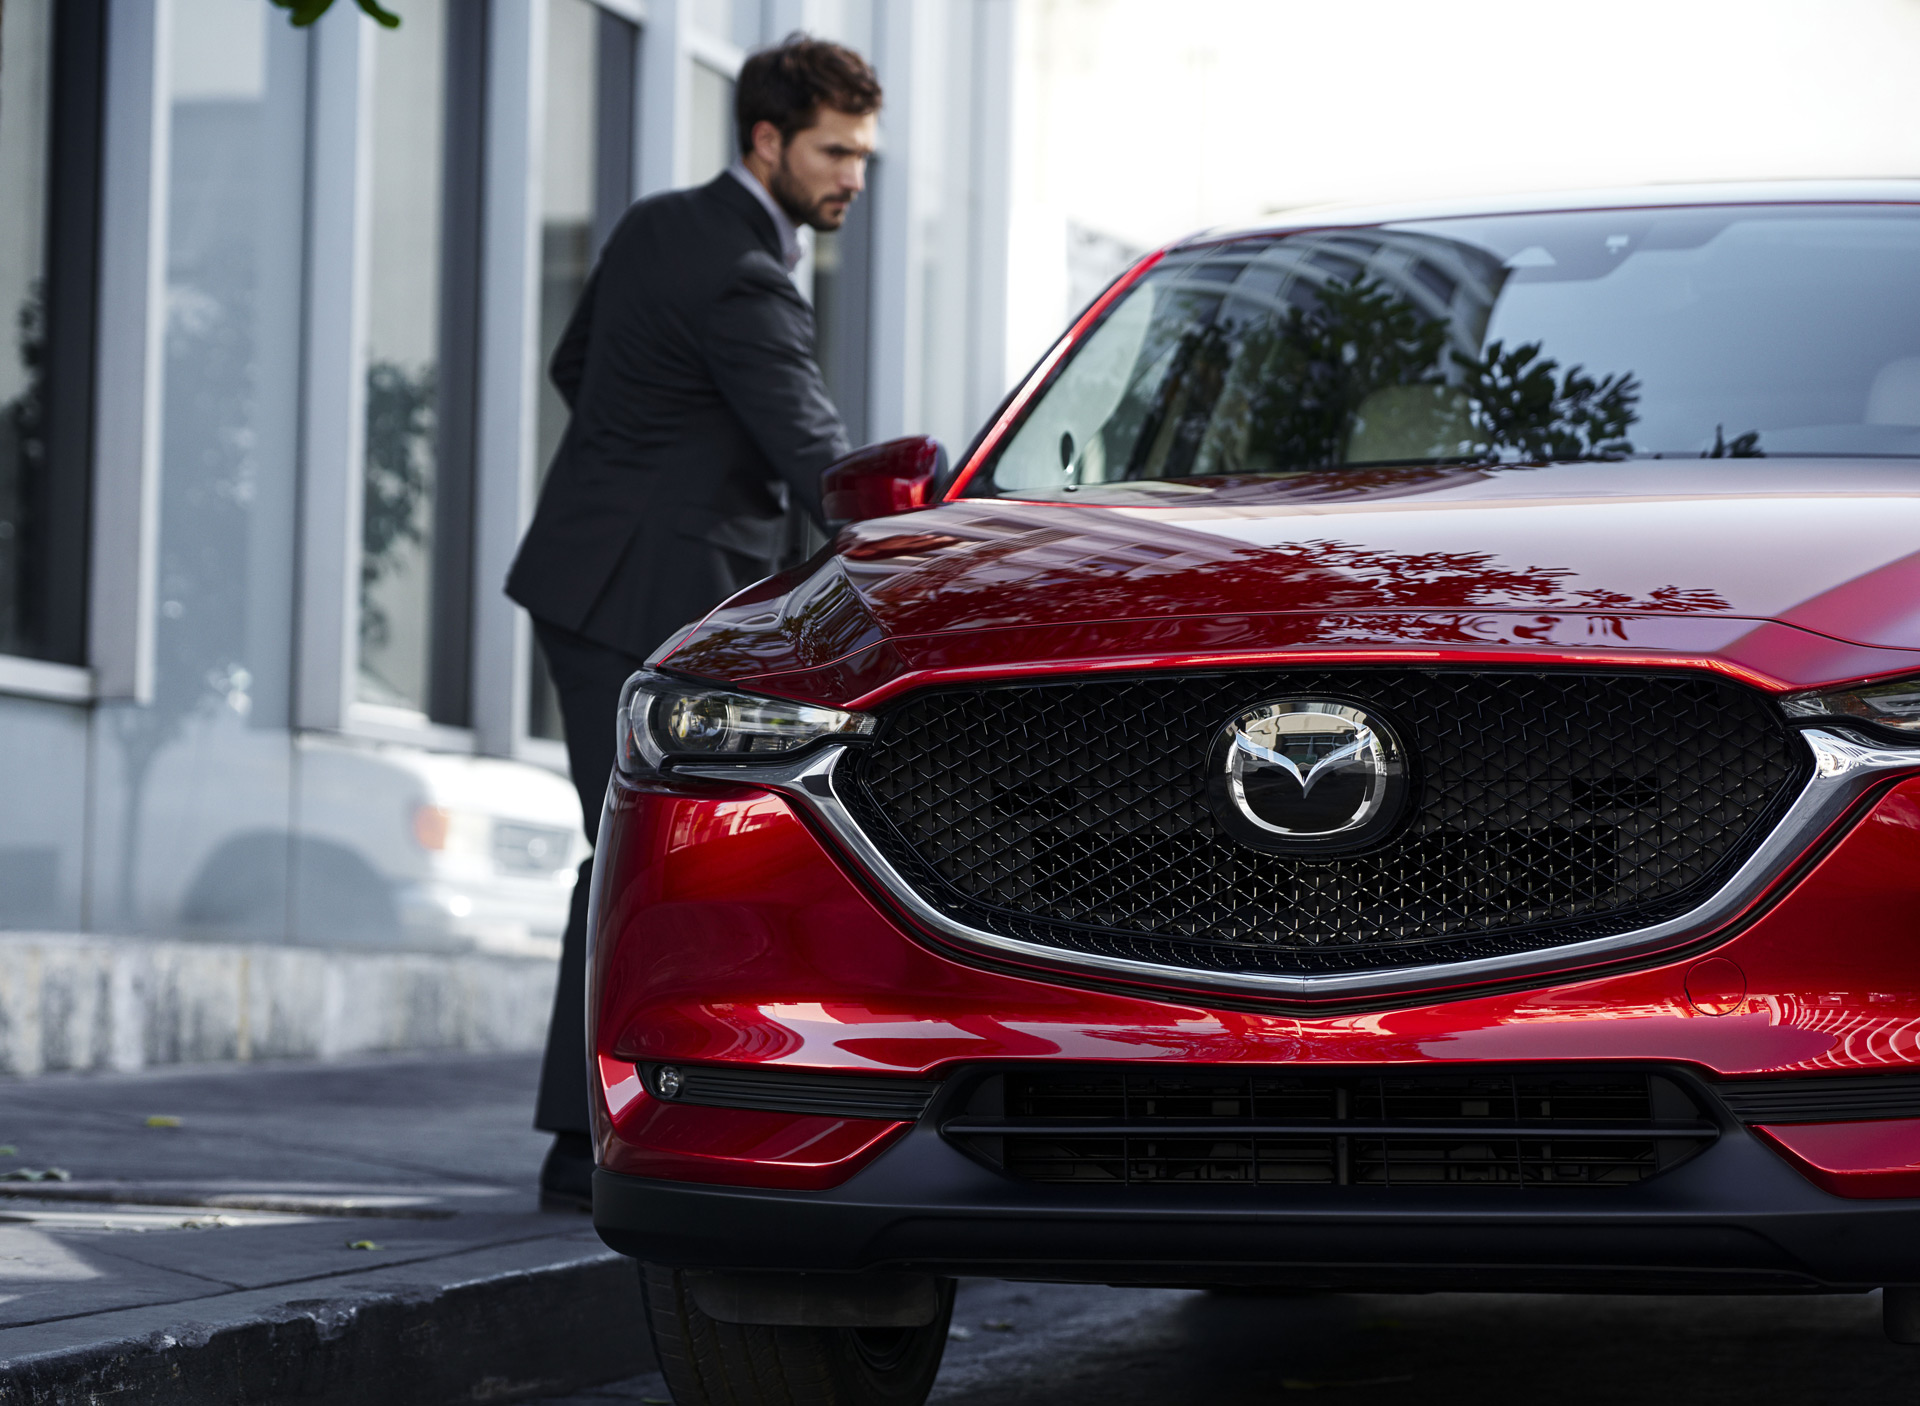 Mazda Motor Corporation today announced an expansion of its SUV Lineup from 2022 onwards